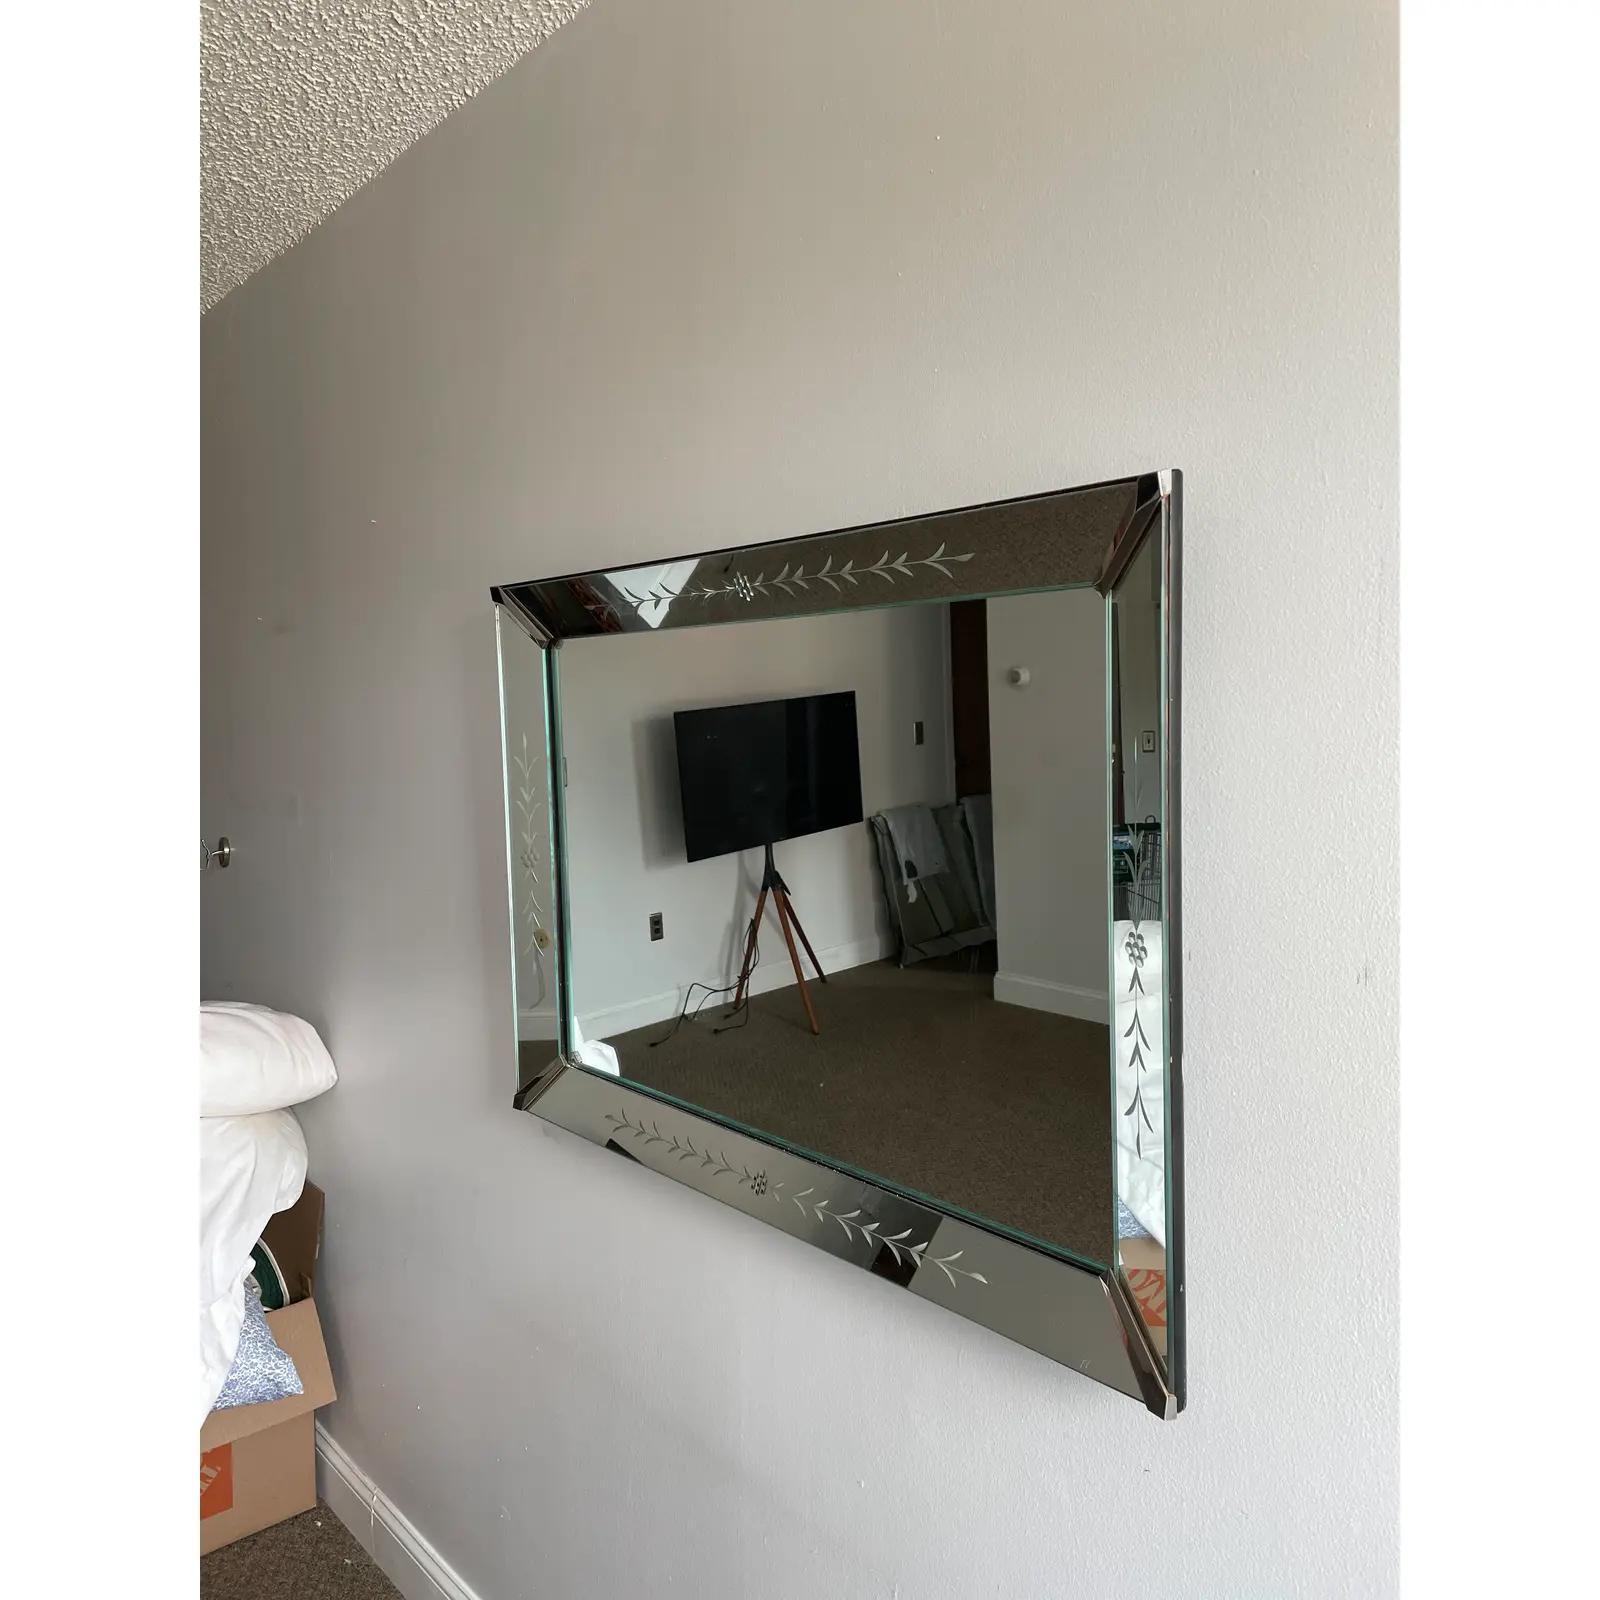 Beautiful Art Deco Beveled Shadowbox Mirror with wonderful etched detail. Metal corner brackets. Curbside delivery available.